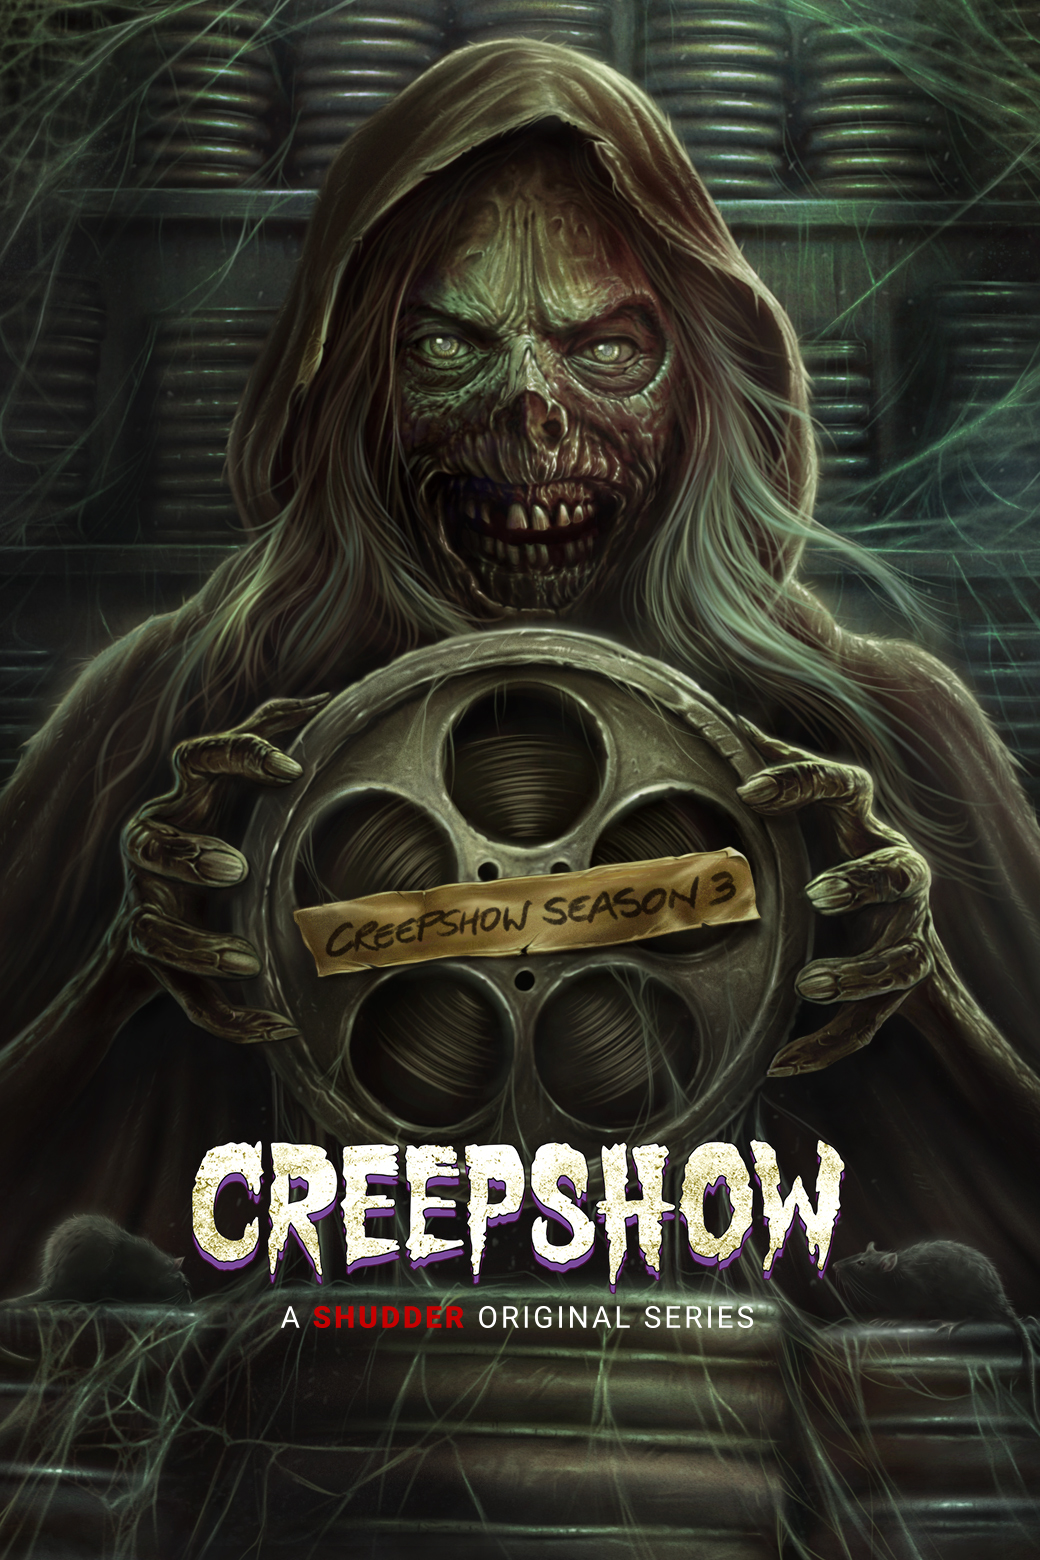 series_tms_SH033244280000_creepshow-s3__img_poster_2x3